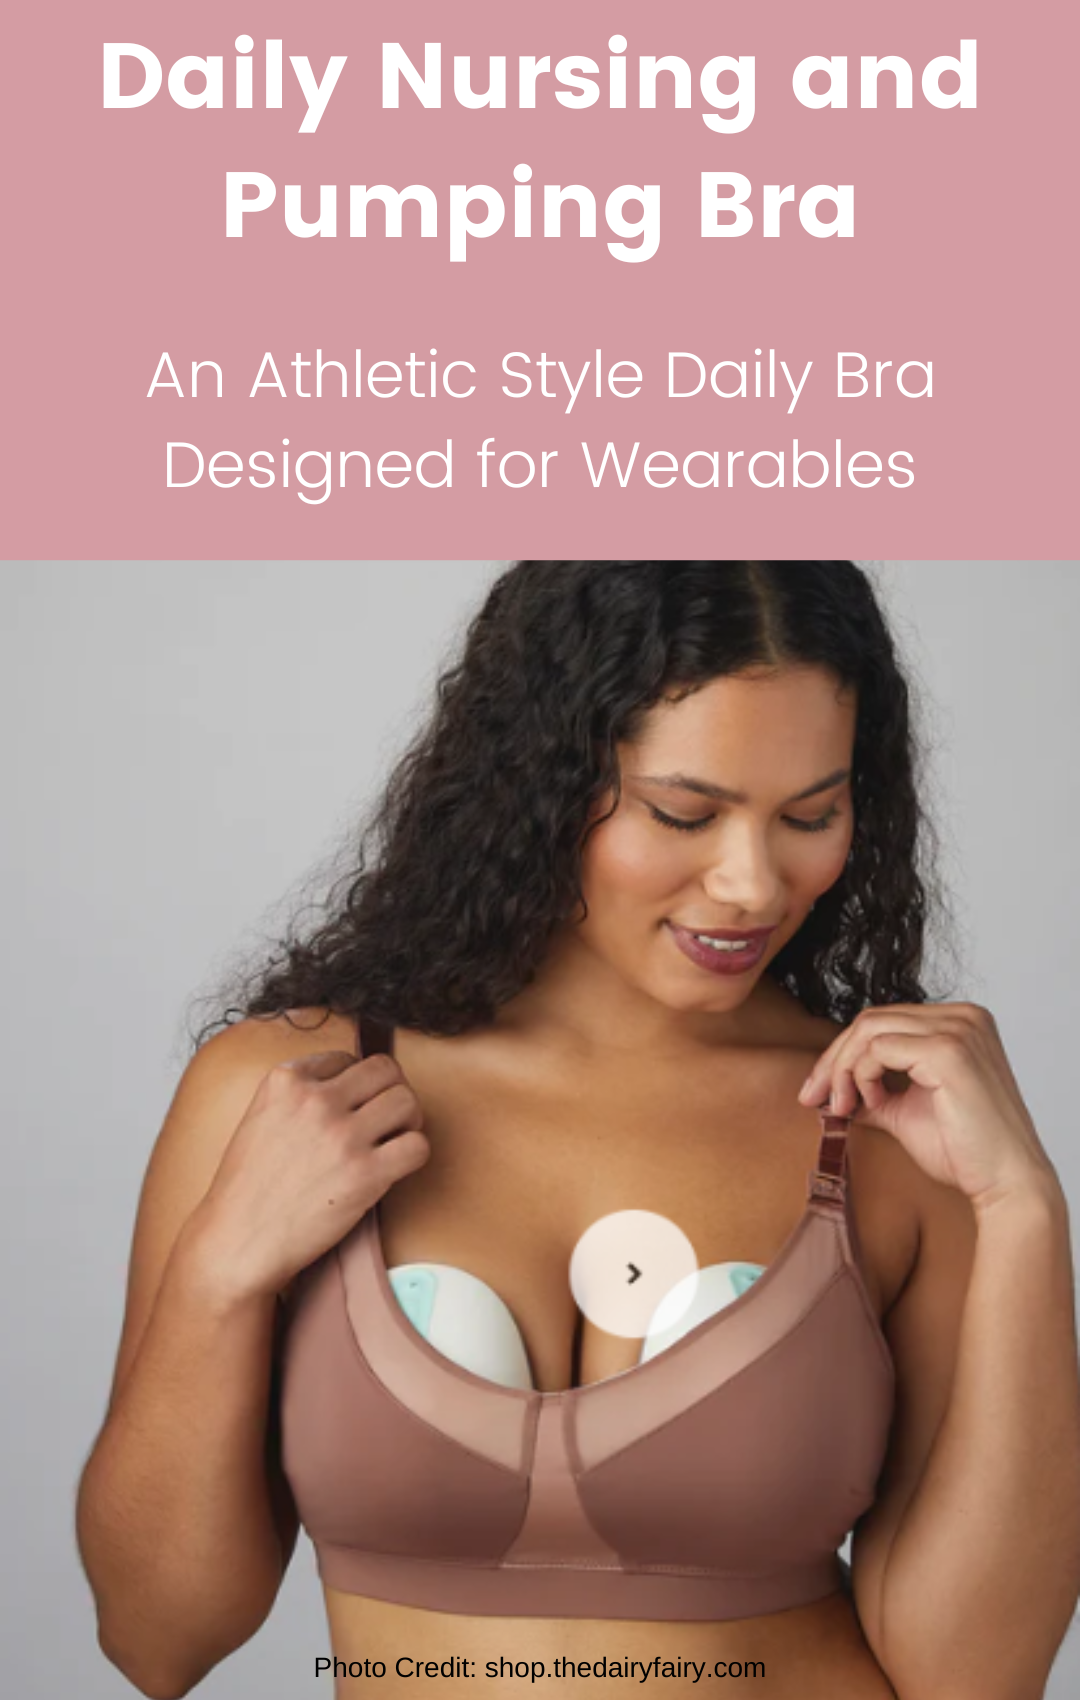 Momcozy's New Bras Redefine Comfort and Style for Postpartum